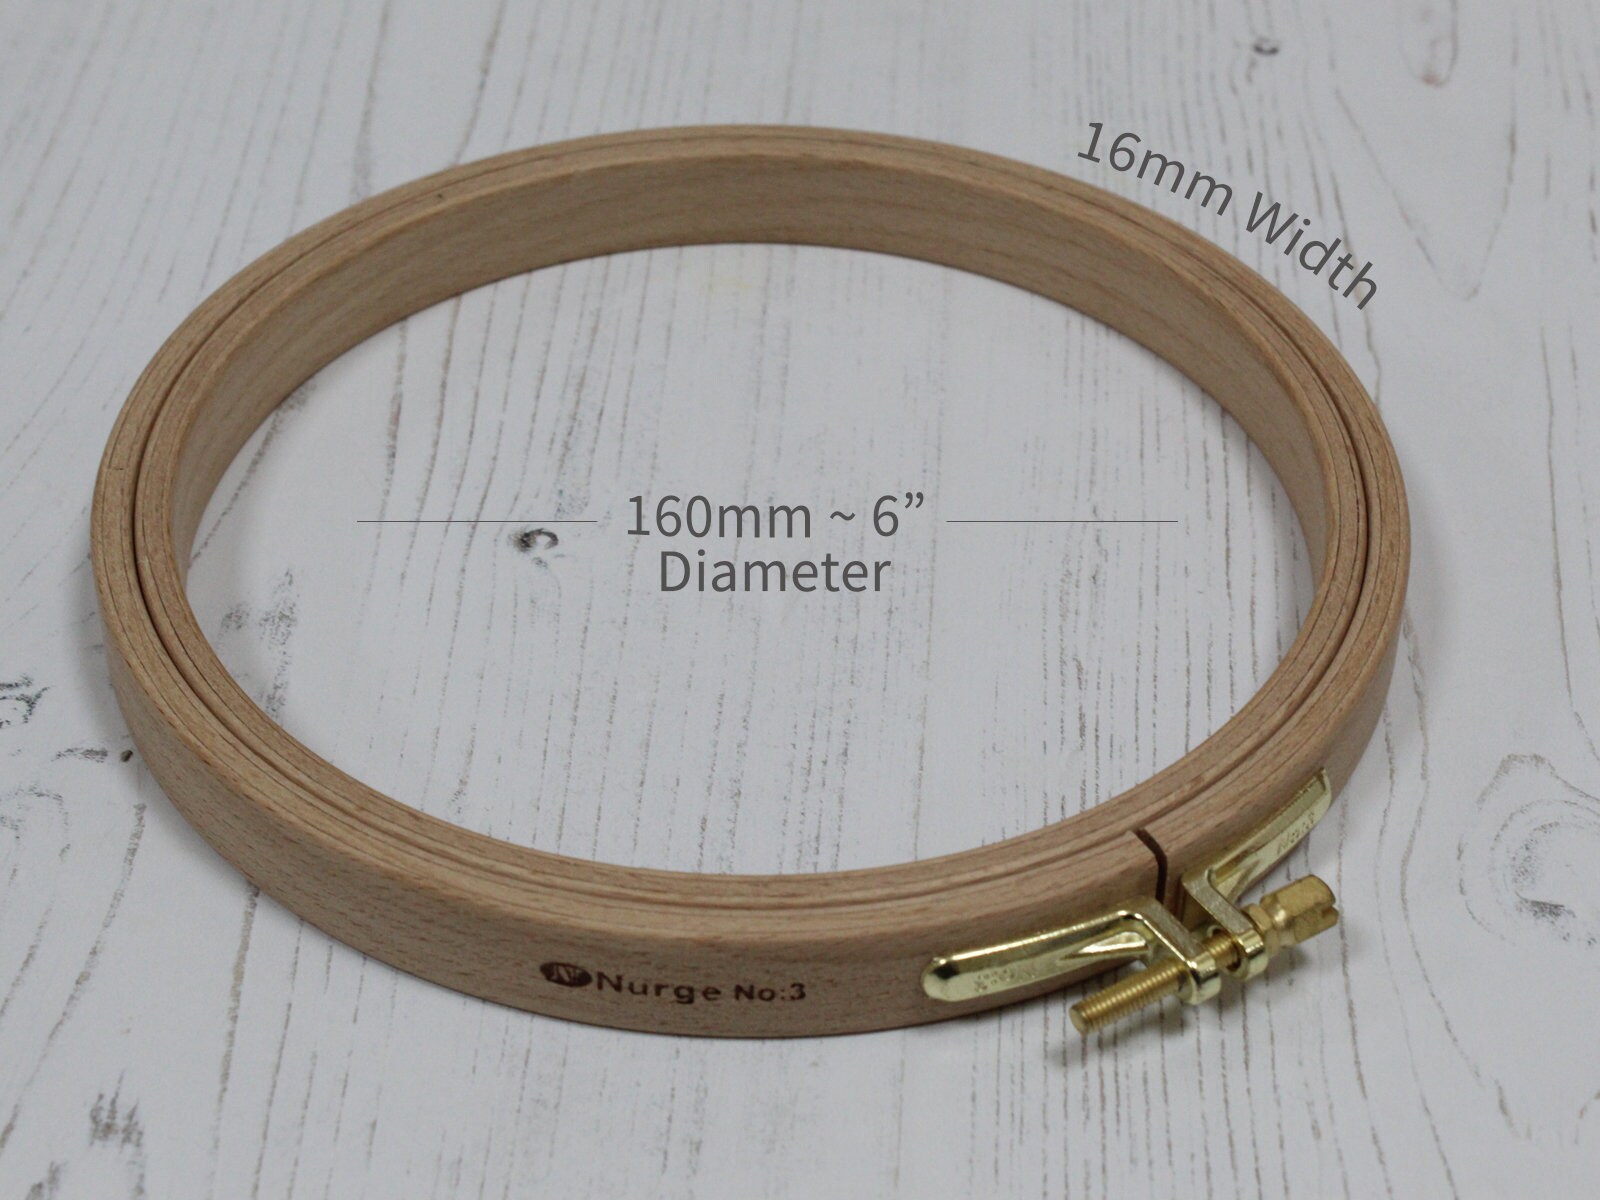 Nurge Premium Beech Wood Gold Clasp Embroidery Hoop 8mm (160mm = 6.29 inch ~ Approx 6 inch)